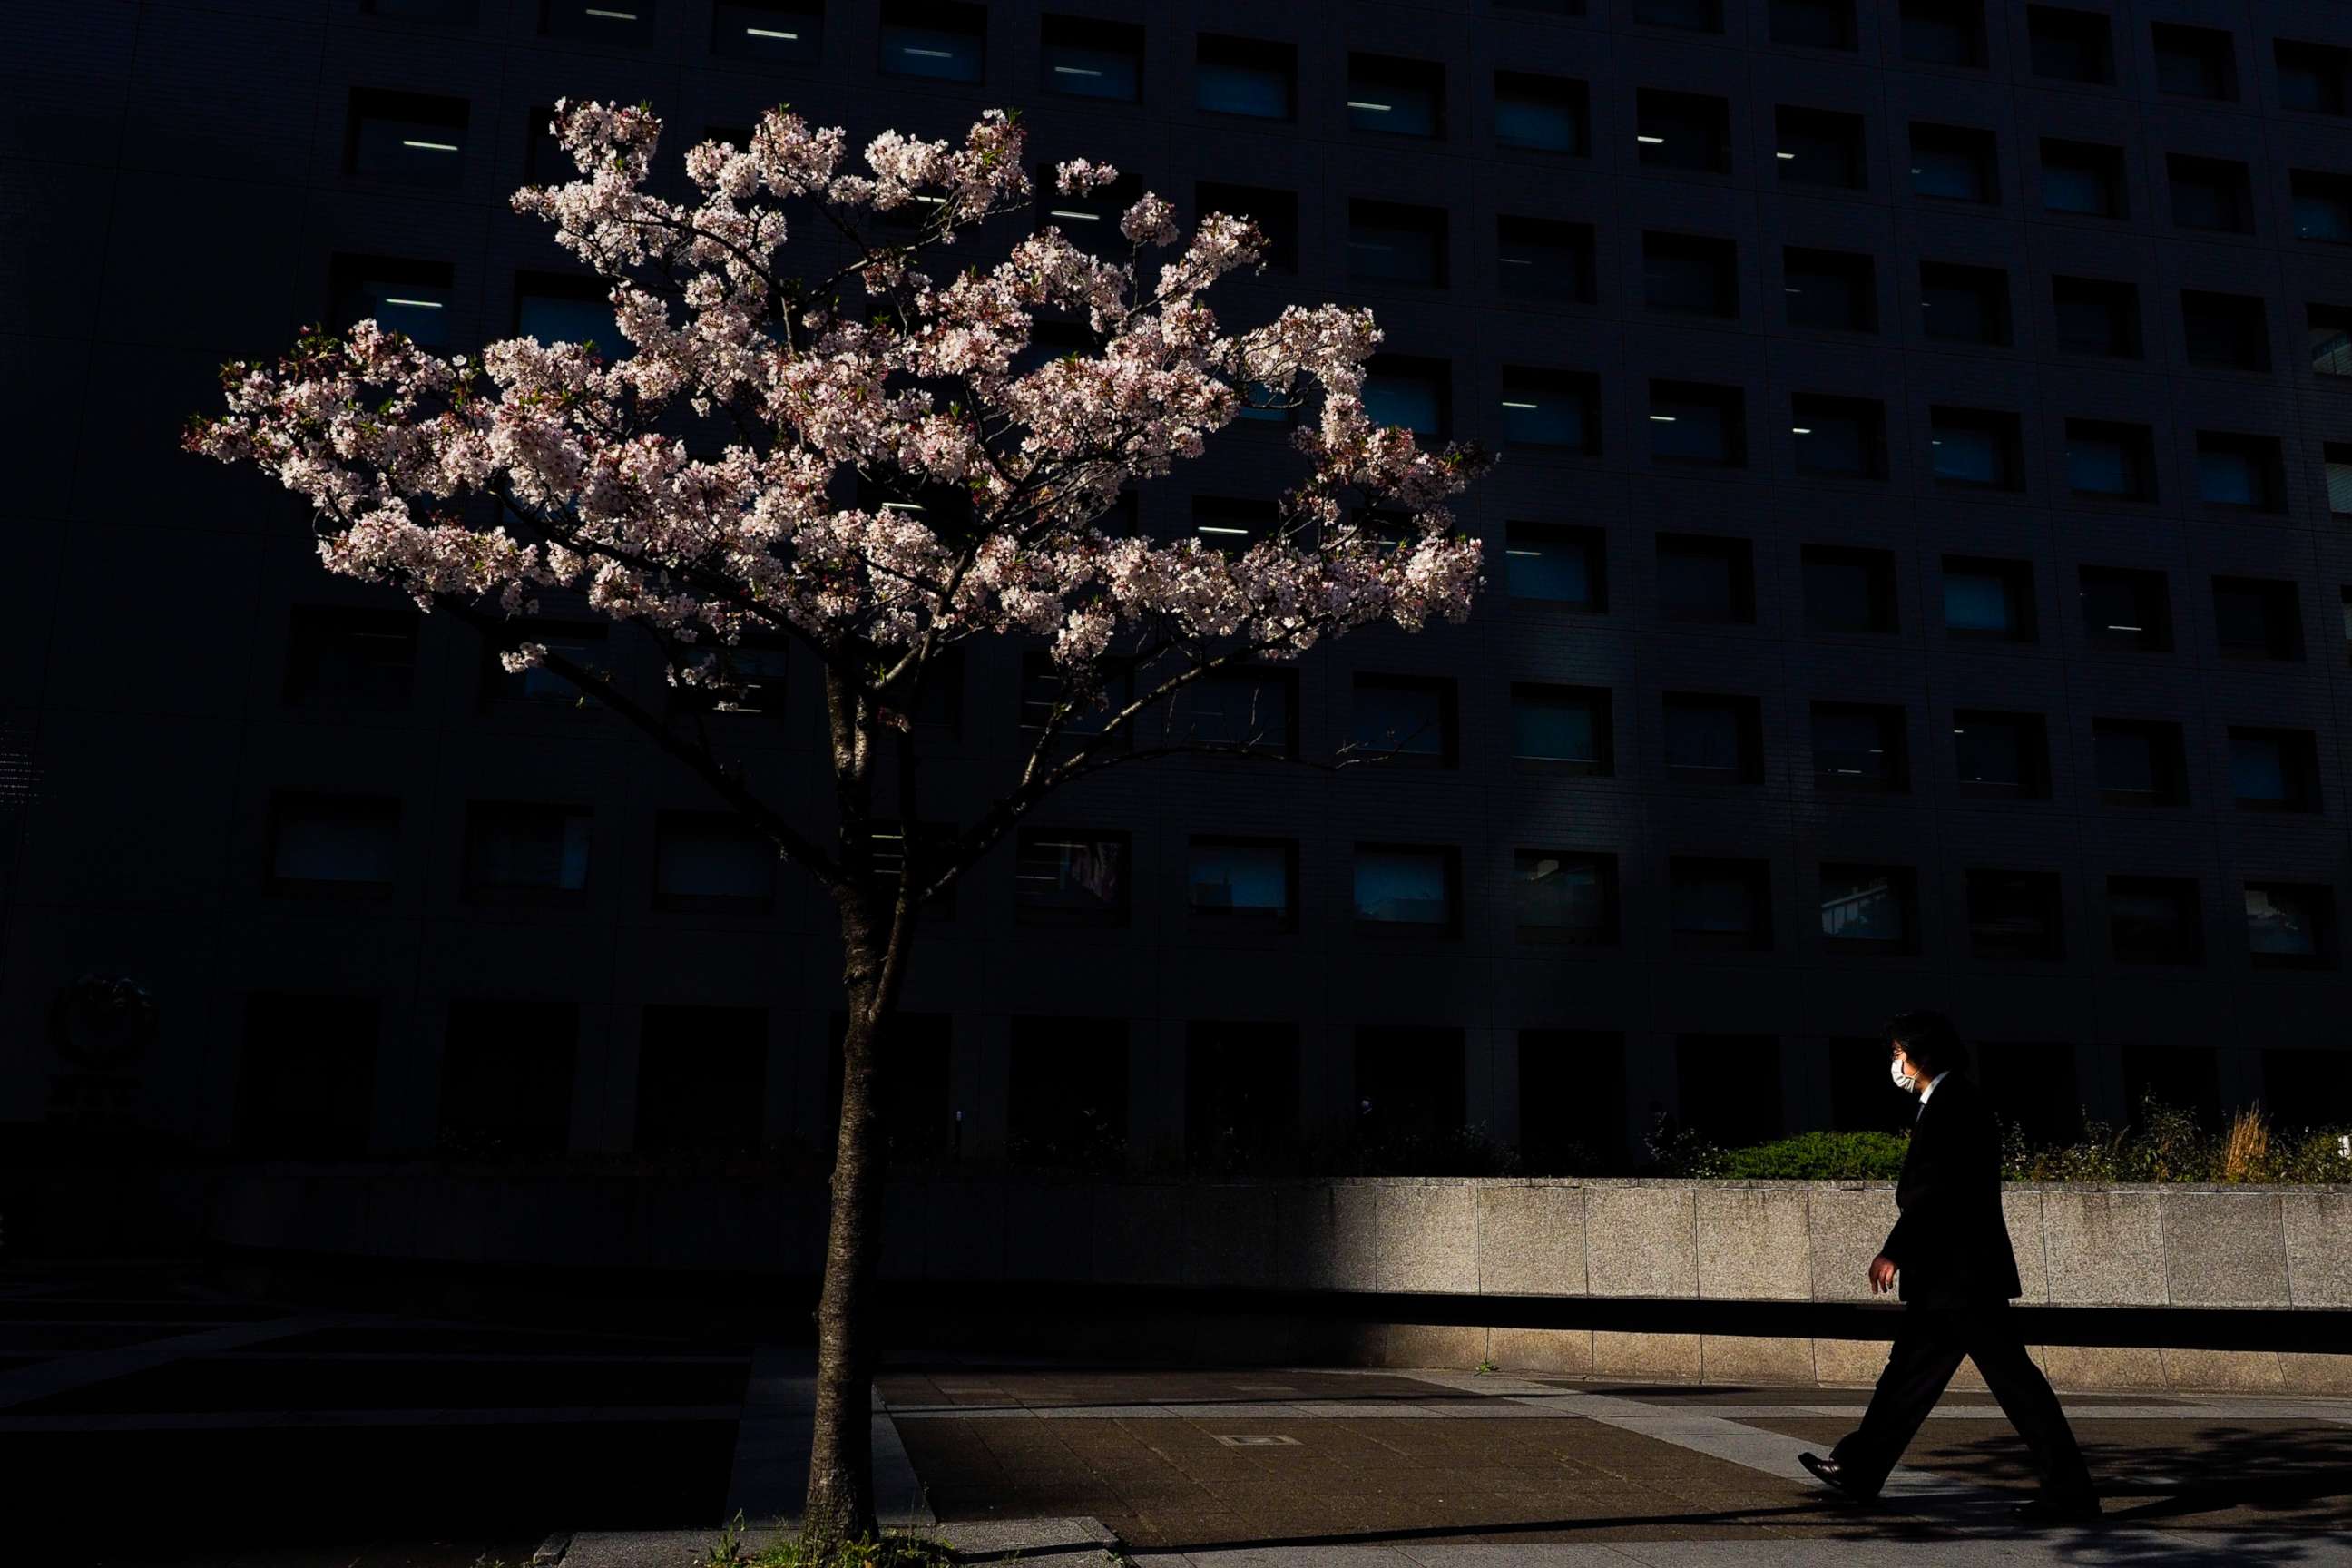 PHOTO: A man wearing a face mask walks past a cherry tree in Tokyo, Japan, on April 6, 2020.